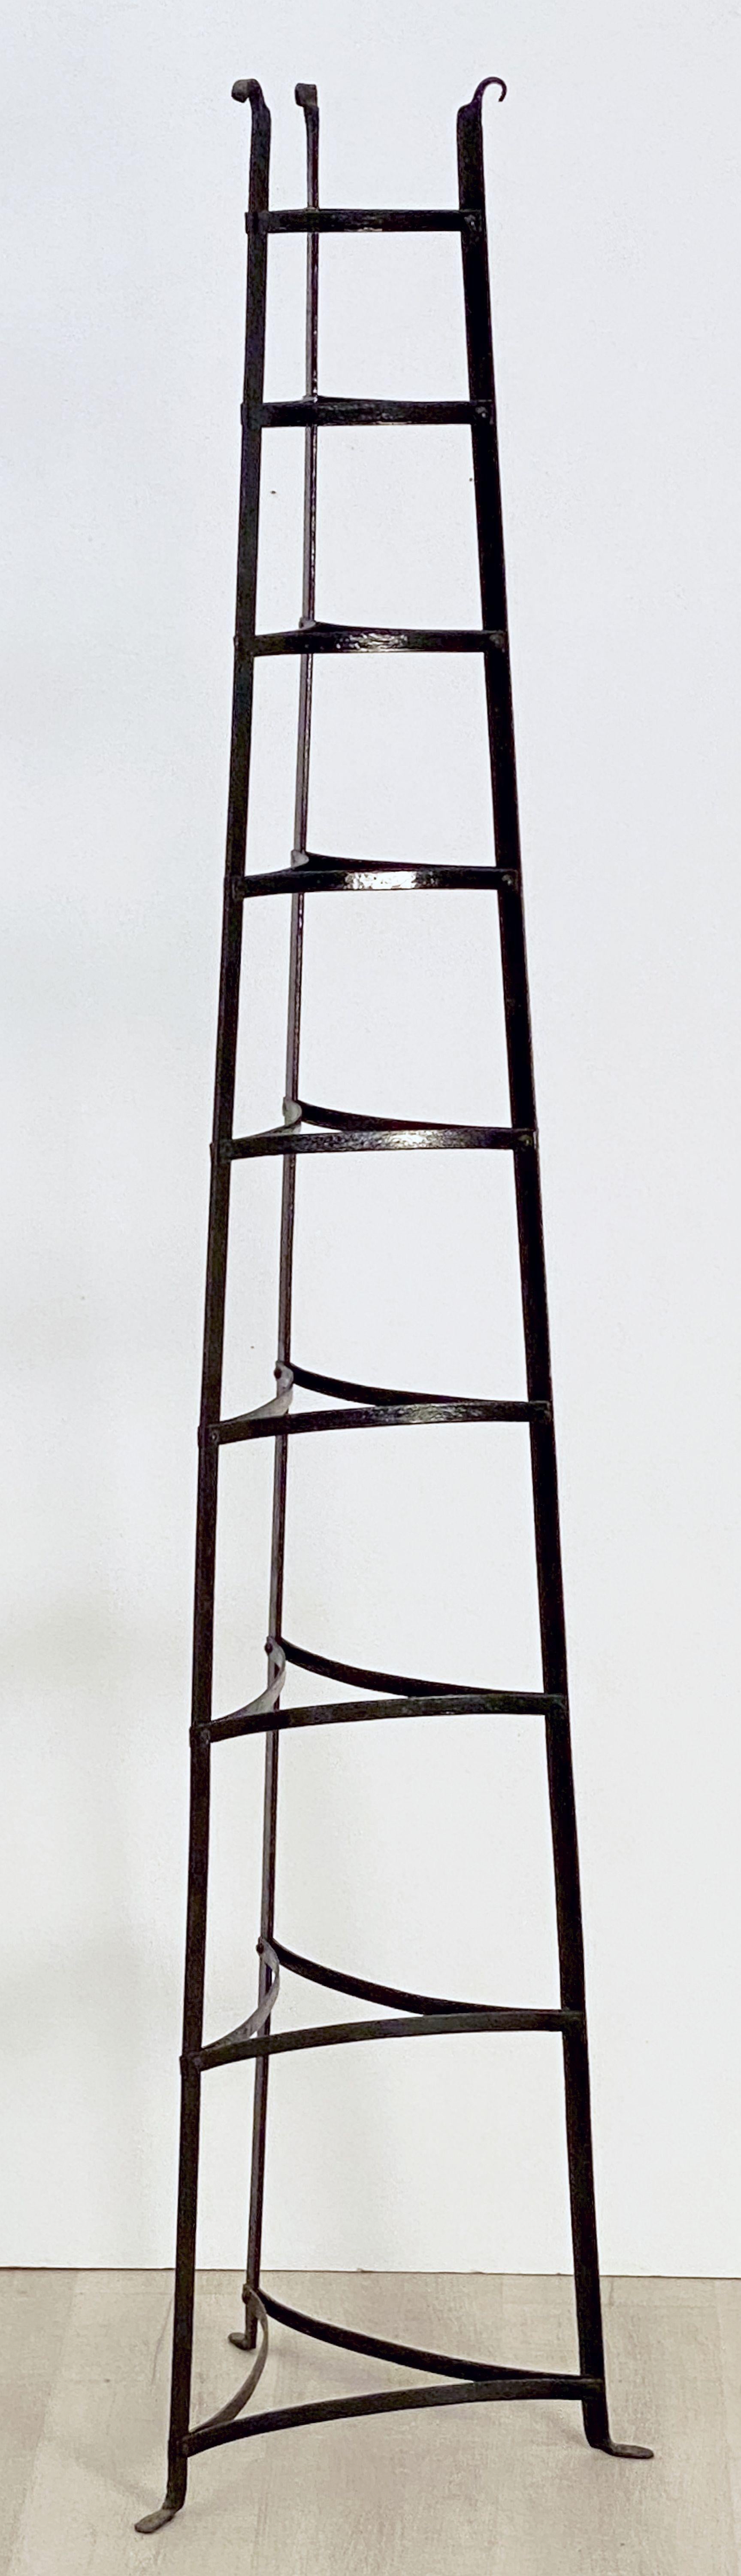 A fine French pan or pot stand of wrought iron featuring nine triangular fitted tiers on a tripod support for the display of cookware.

Can be used for garden pots and other decorative uses as well.